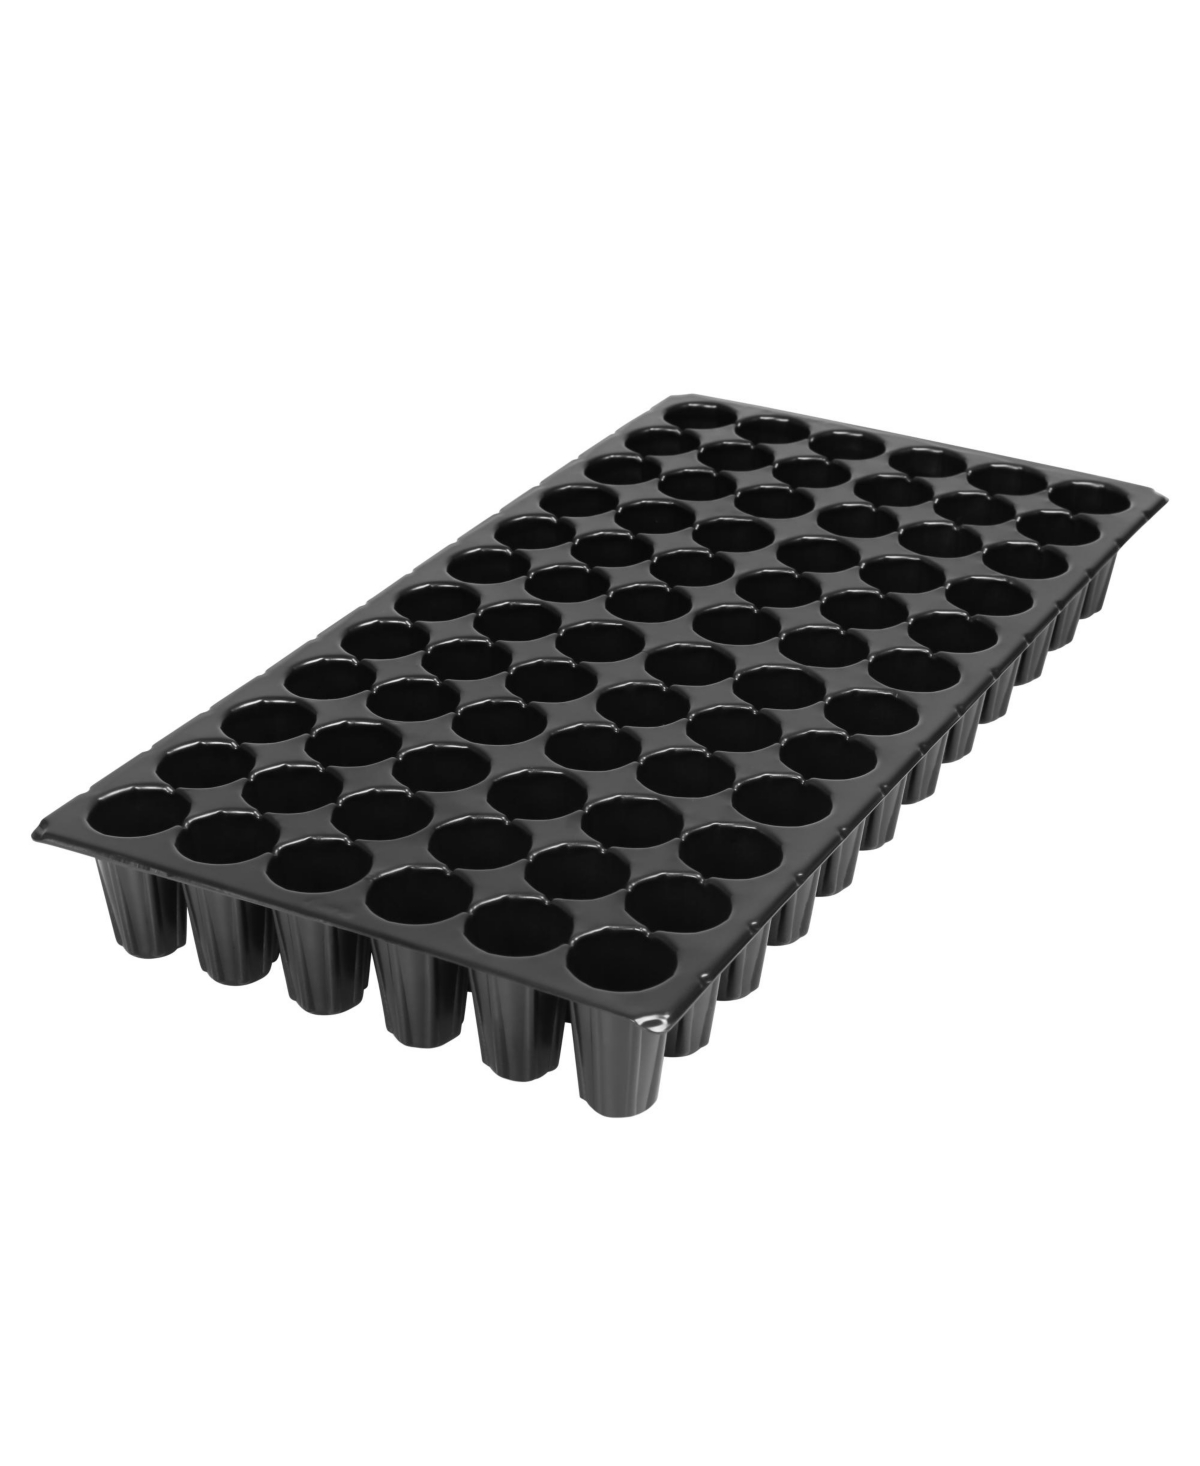 21 x 11in Extra Strength Round 50 Cell Insert Tray, Black - Black